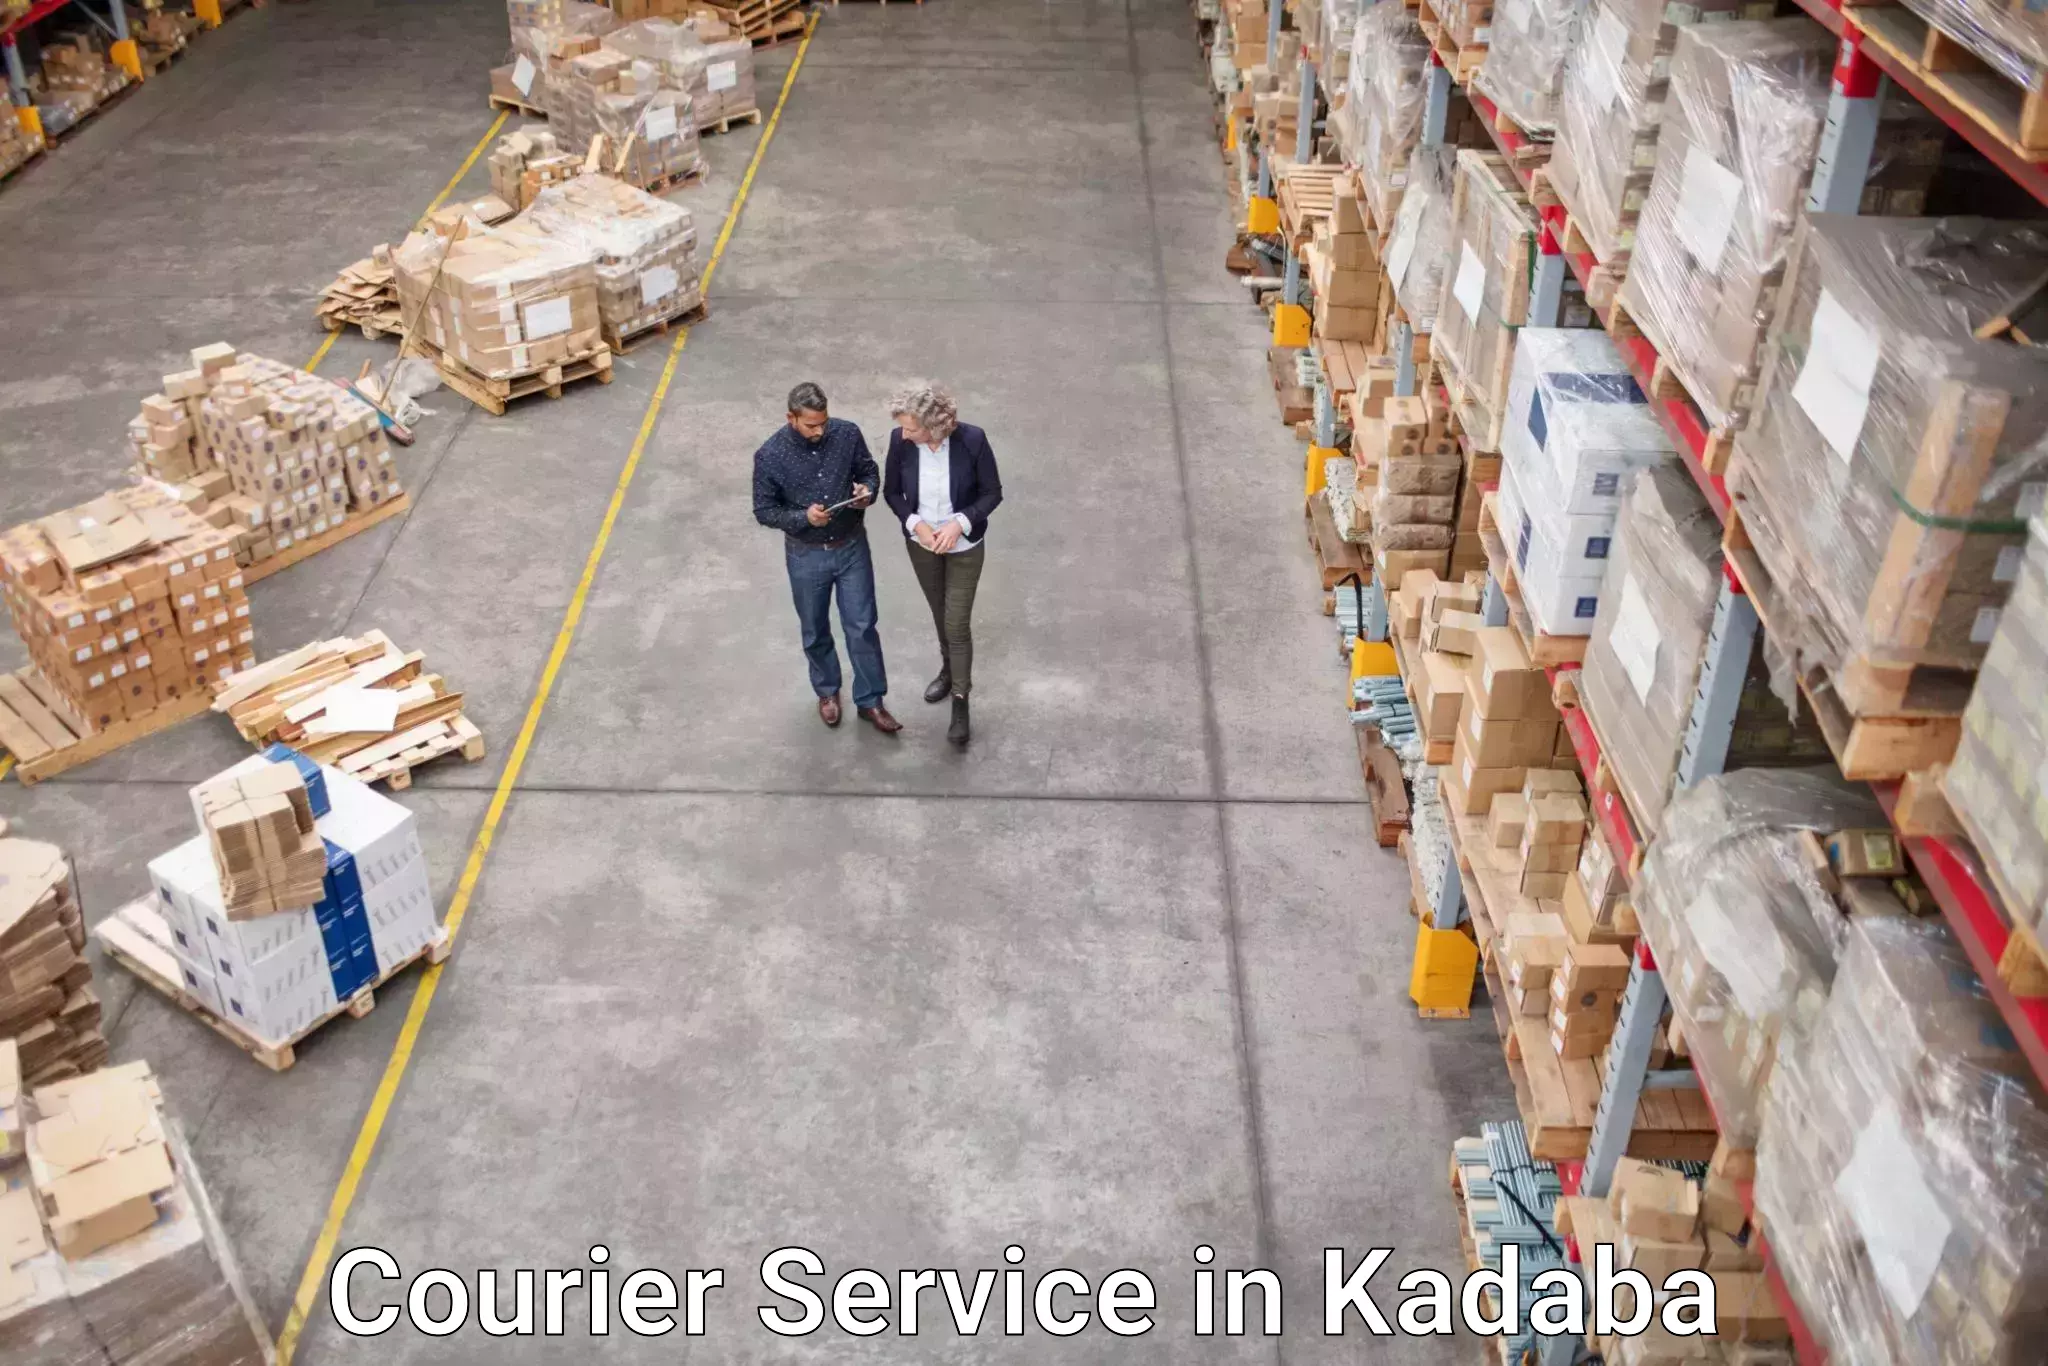 Sustainable delivery practices in Kadaba